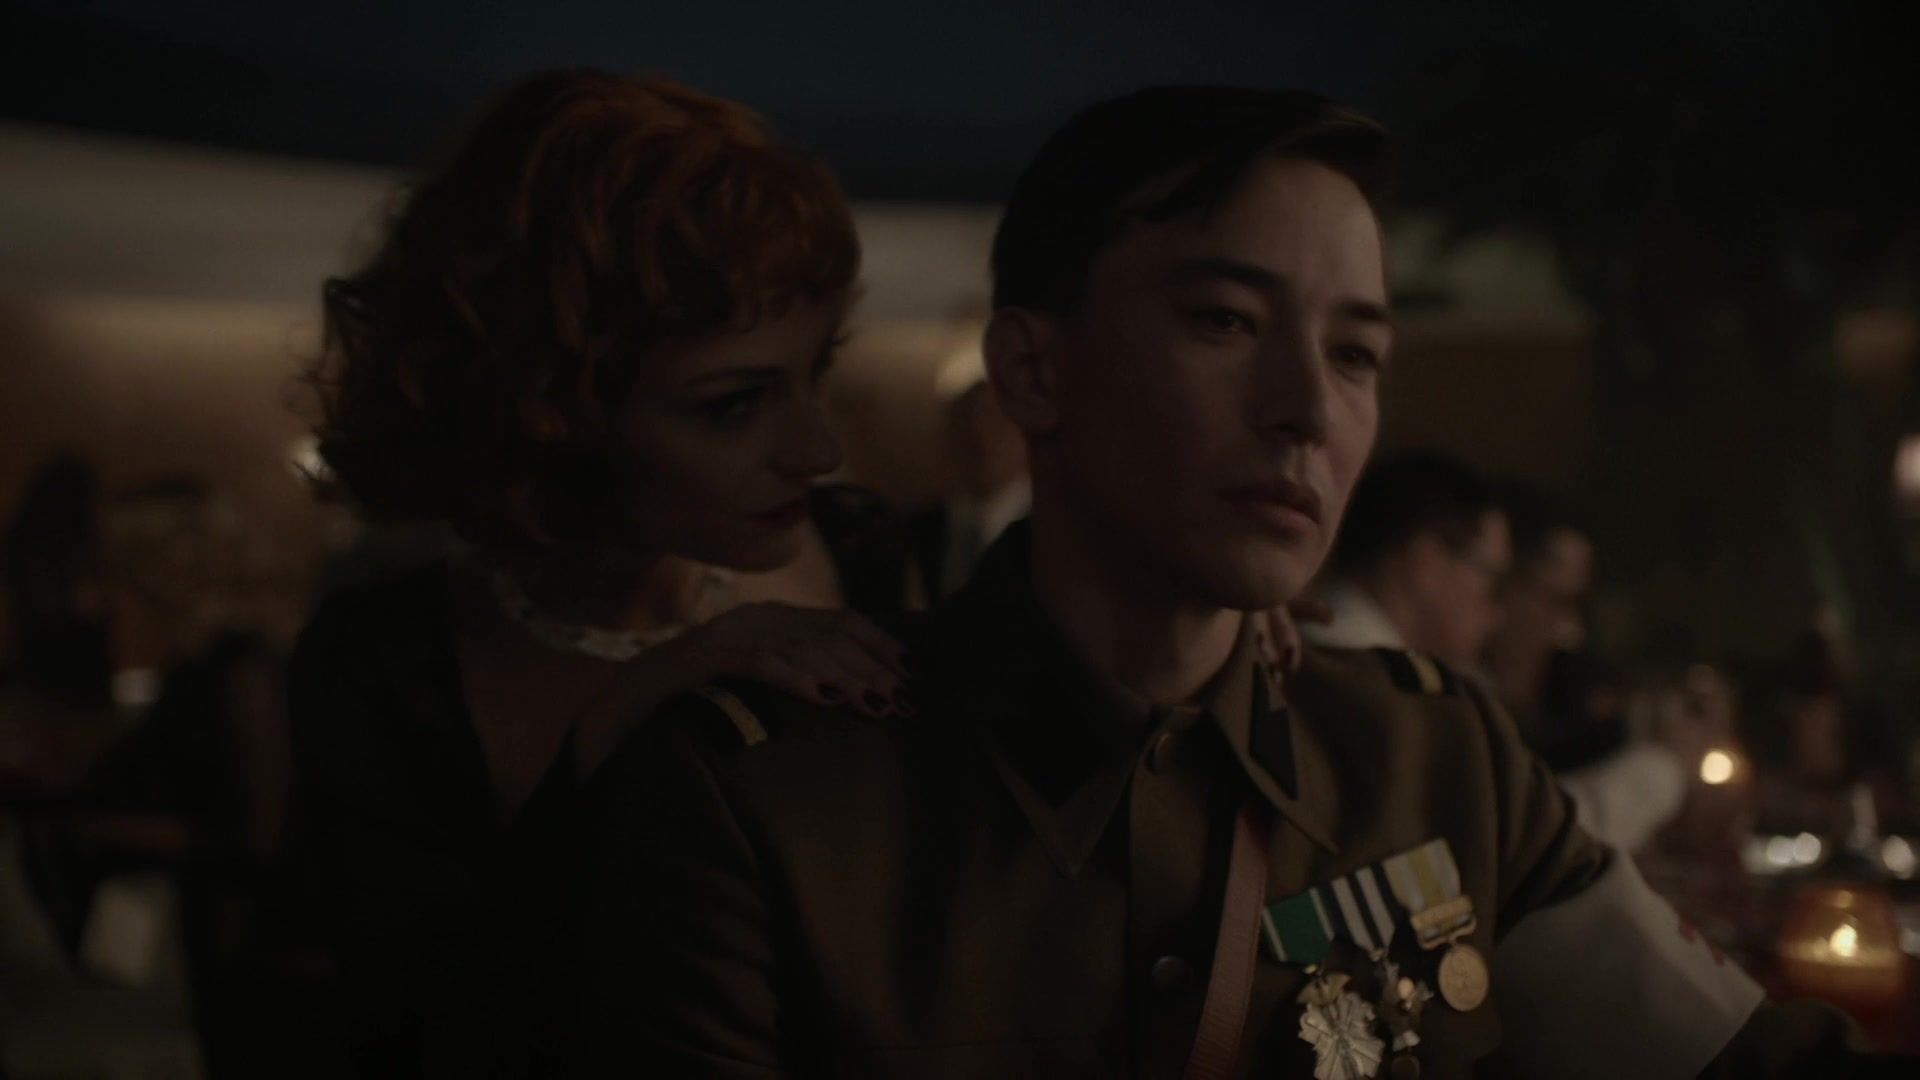 Gay Bukkakeboys Nude Destiny Millns - The Man in the High Castle s04e03 (2019) Gay Shaved